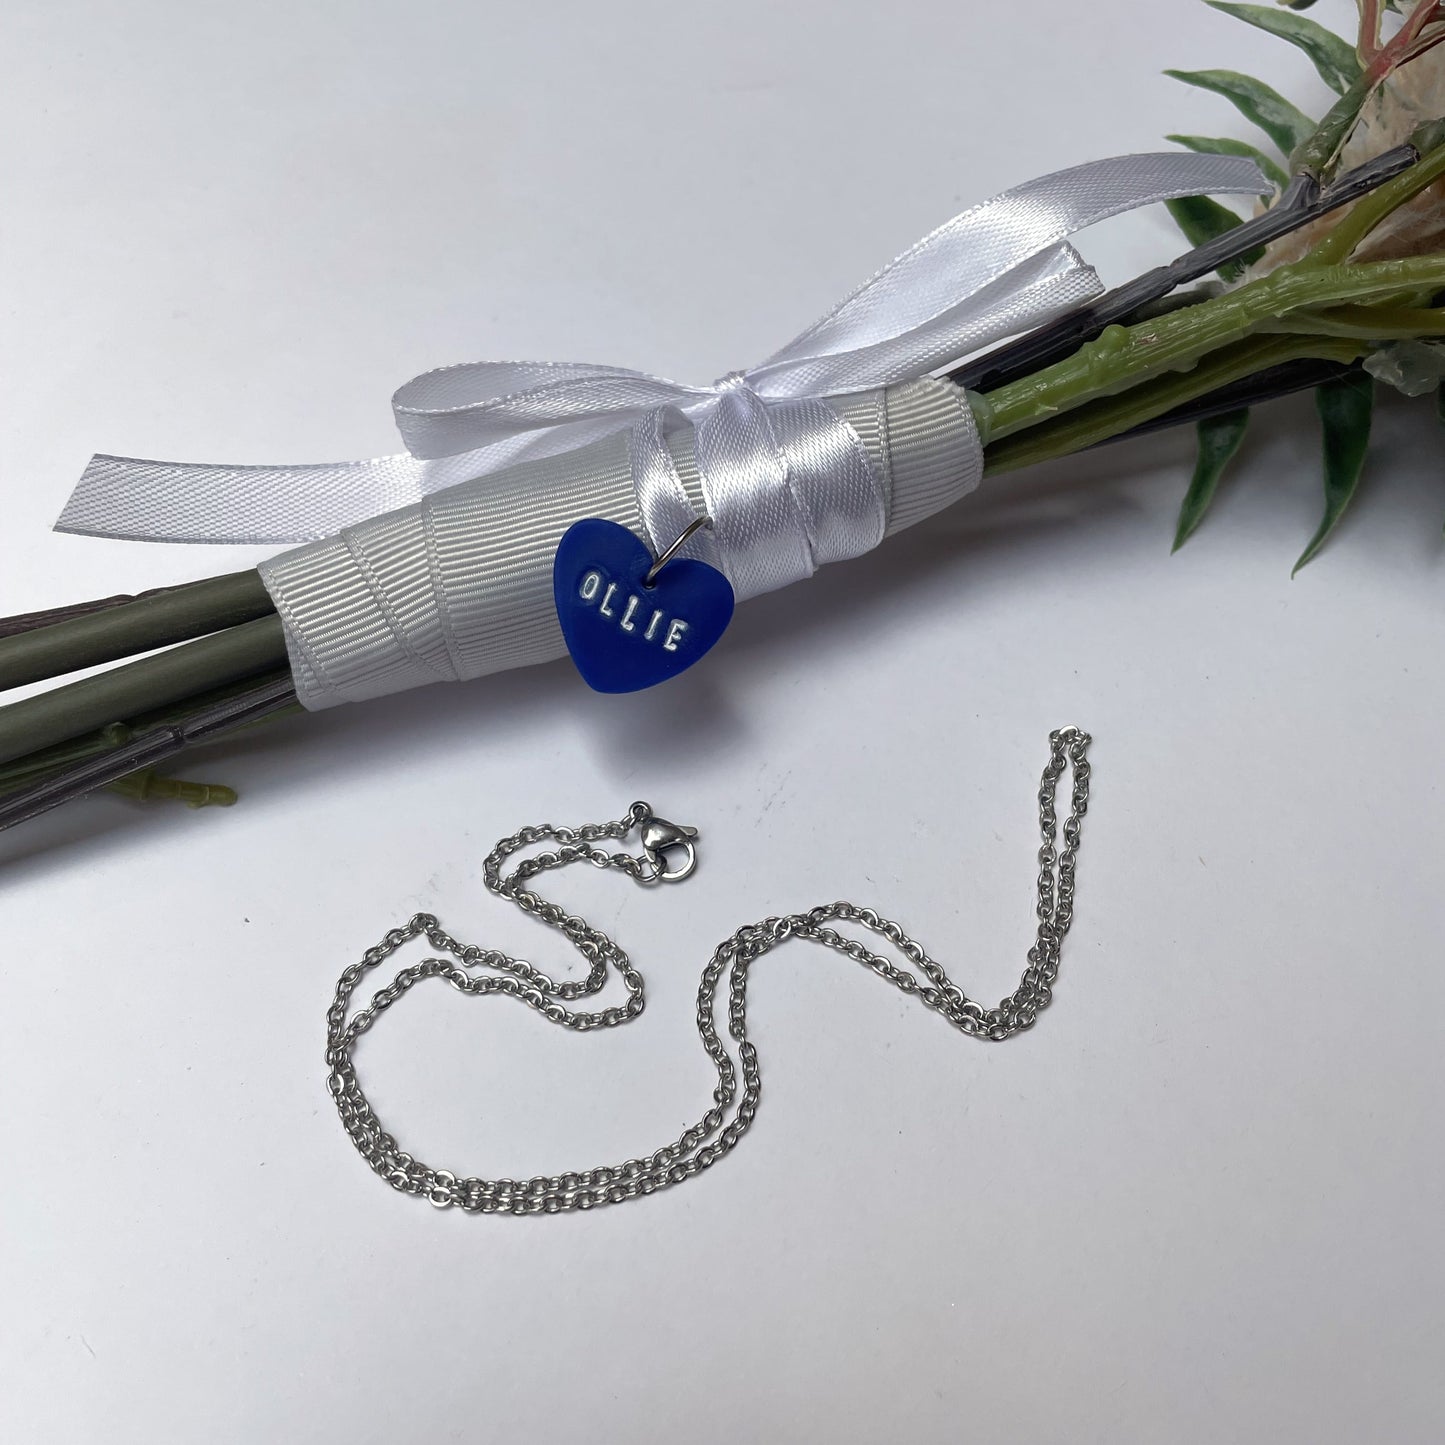 Blue heart handmade bouquet pendant with name 'ollie' in white. In the foreground is a silver necklace chain.